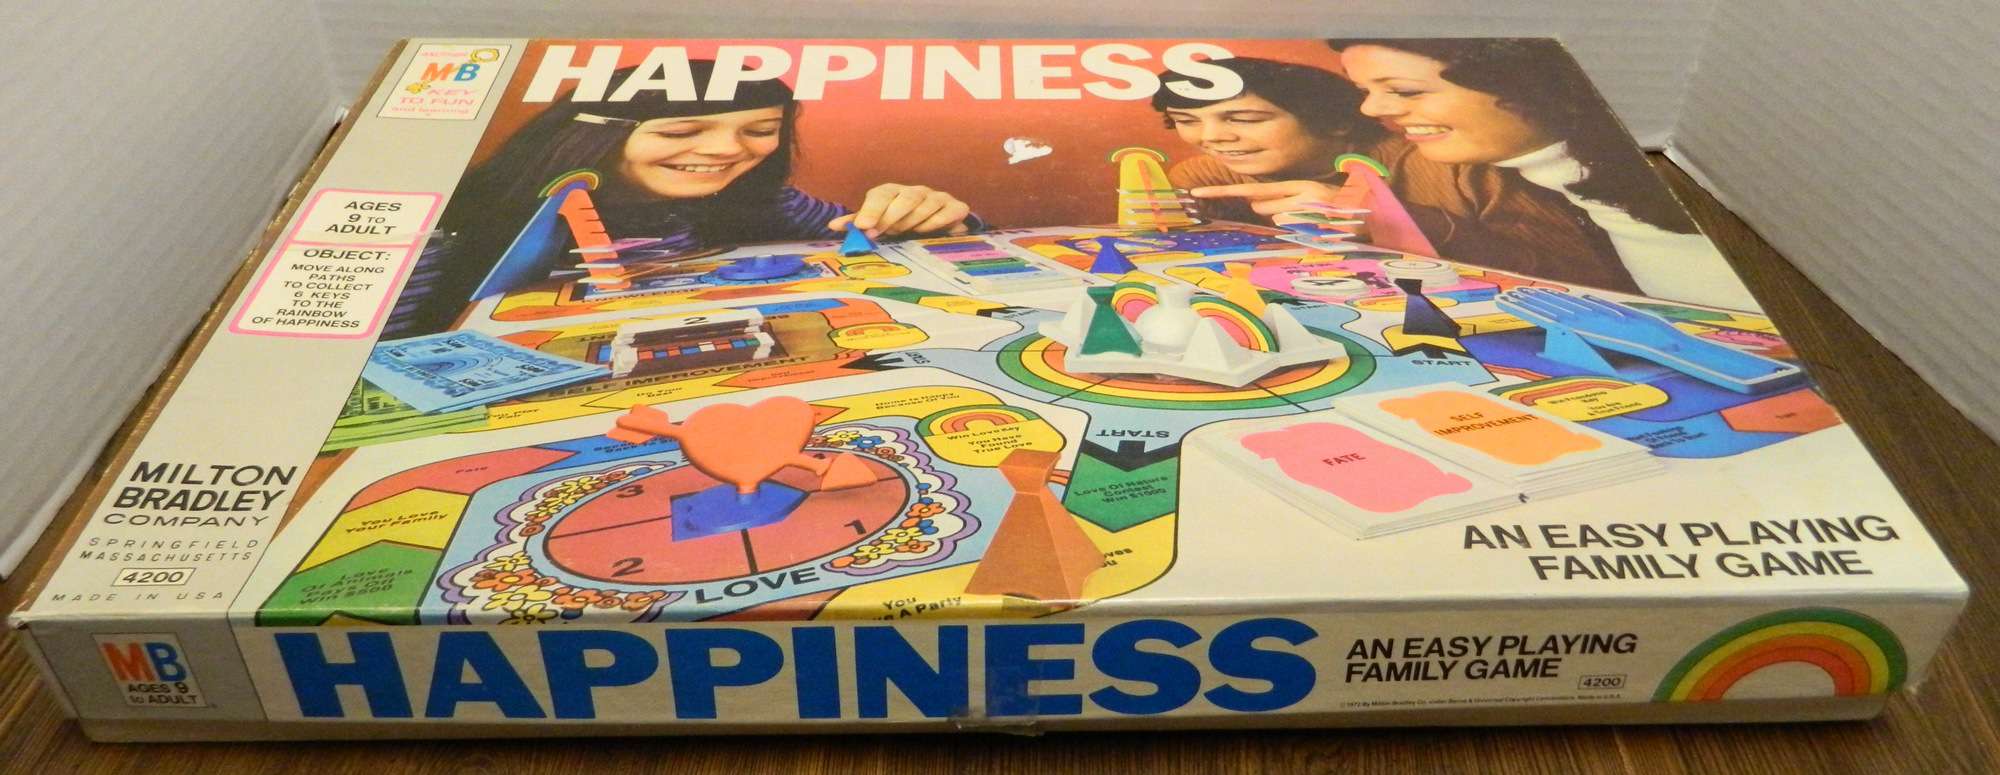 Box for Happiness Game